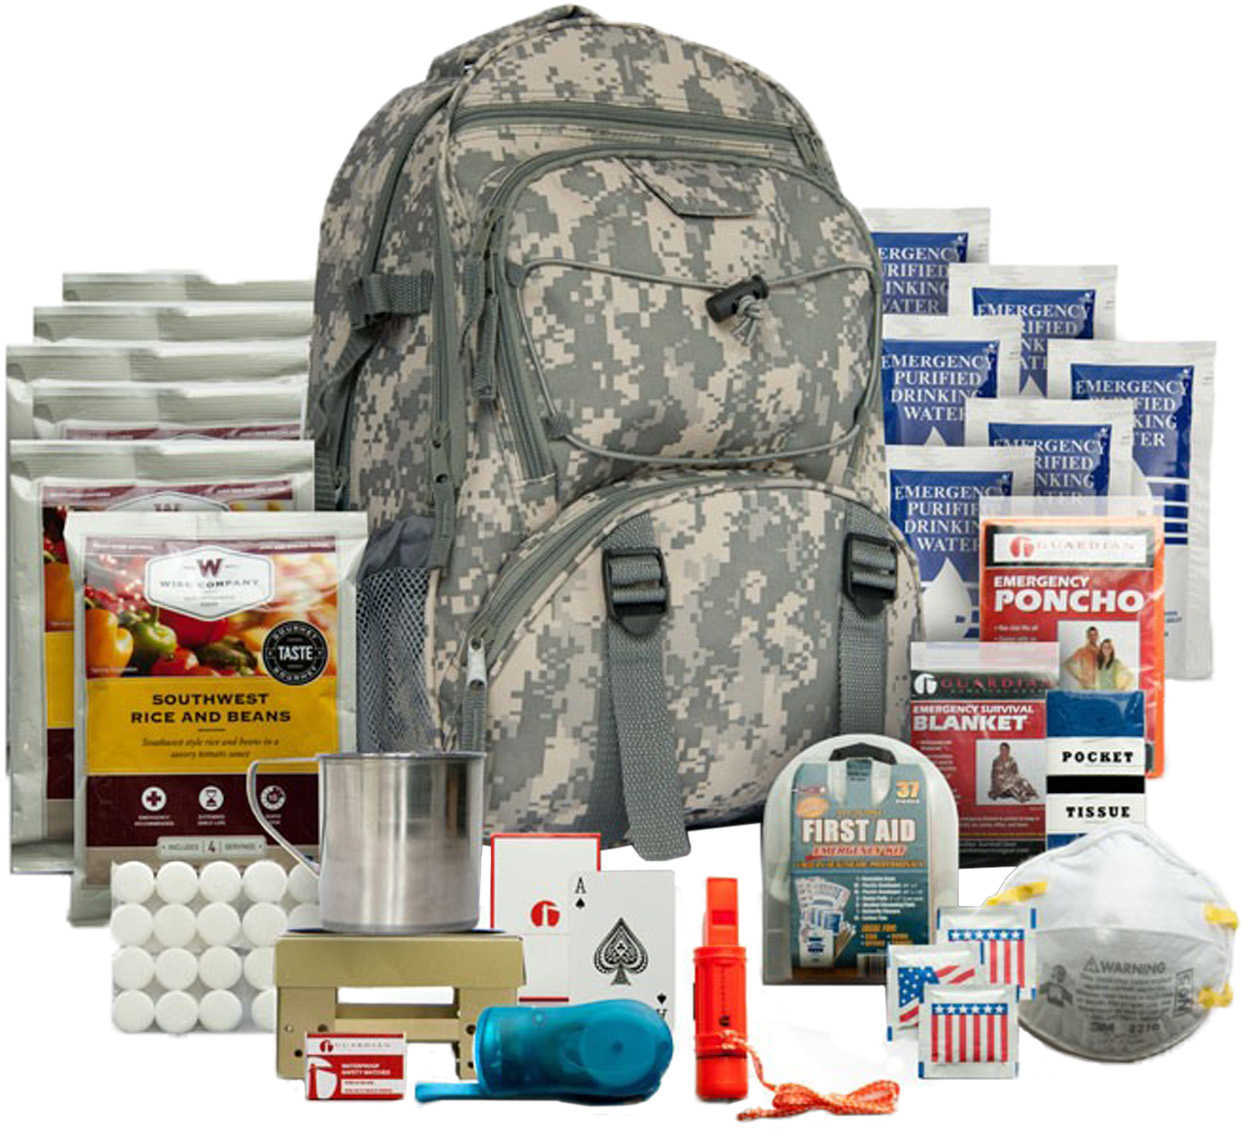 Wise 5 Day Survival Pack In Digital Camo Backpack